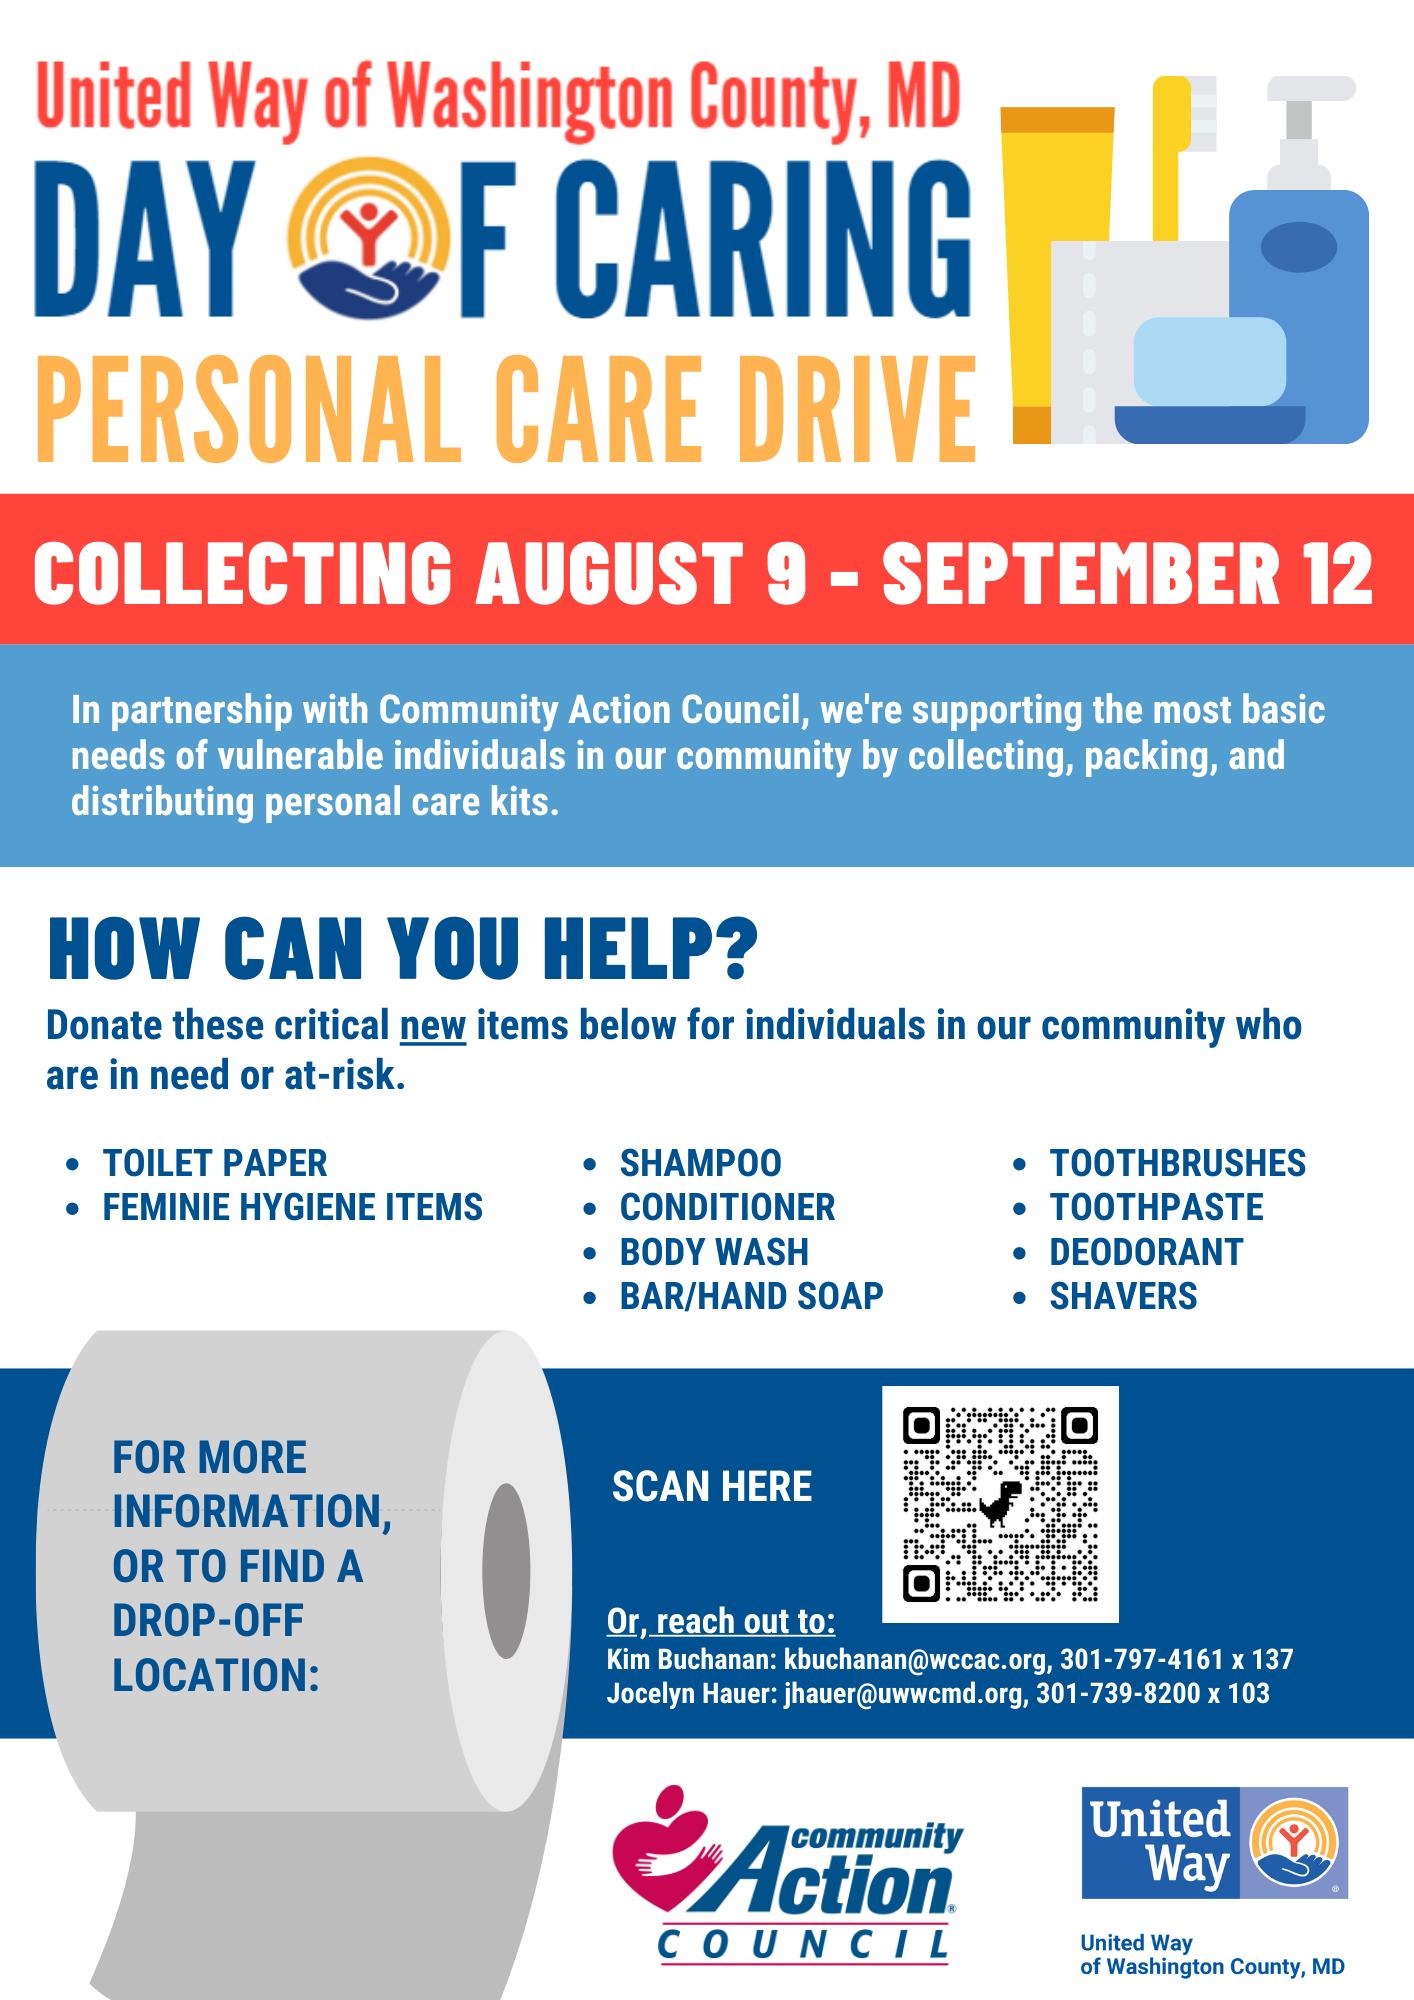 Personal Care Drive